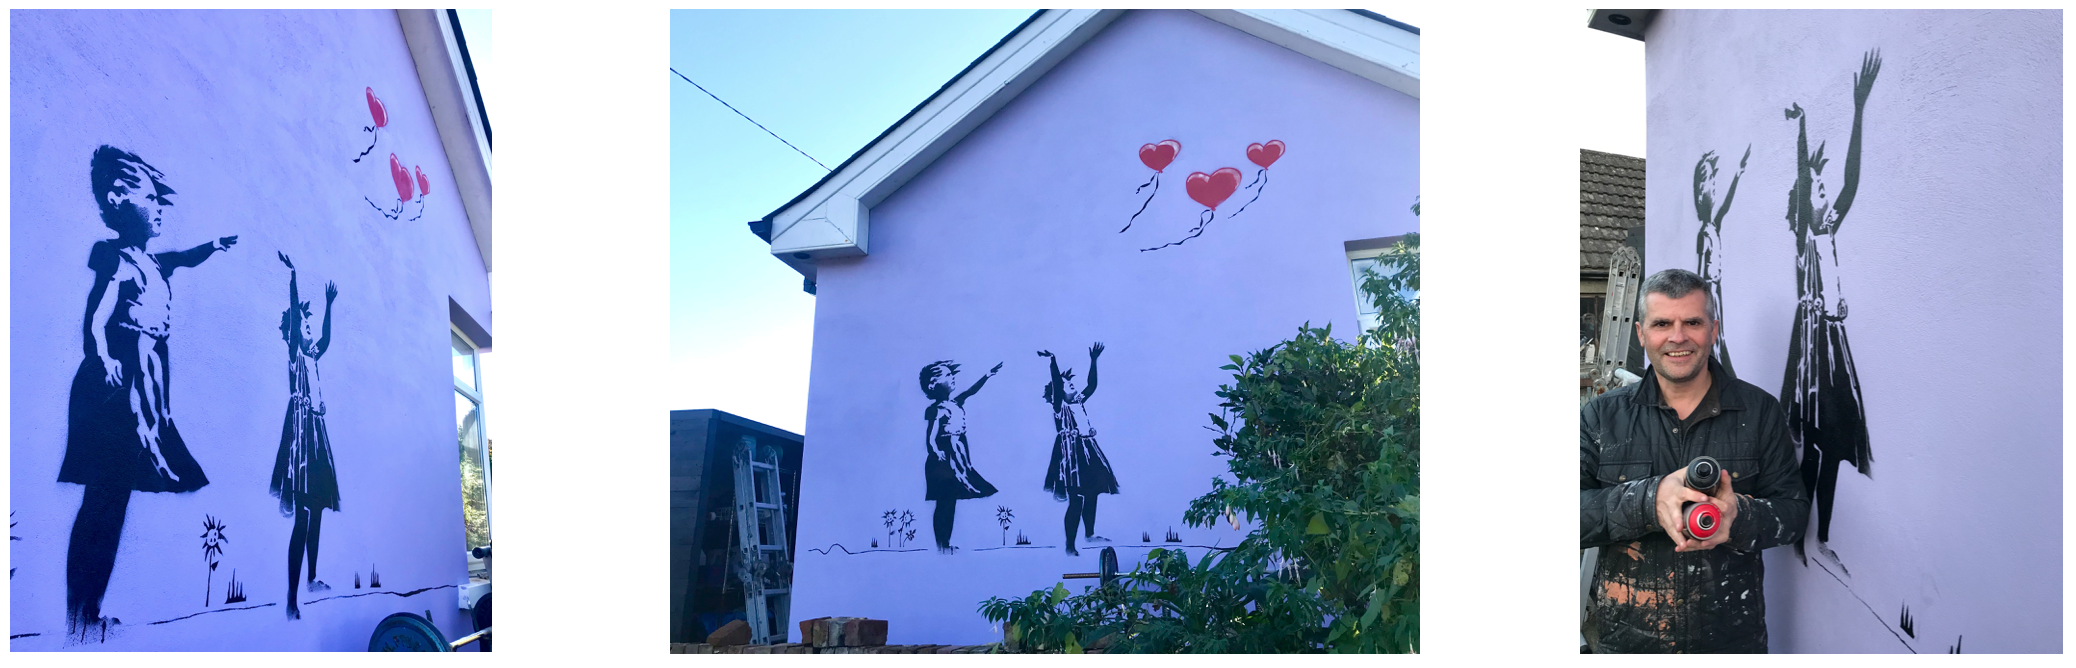 I always wanted to do a Banksy style mural …!!!